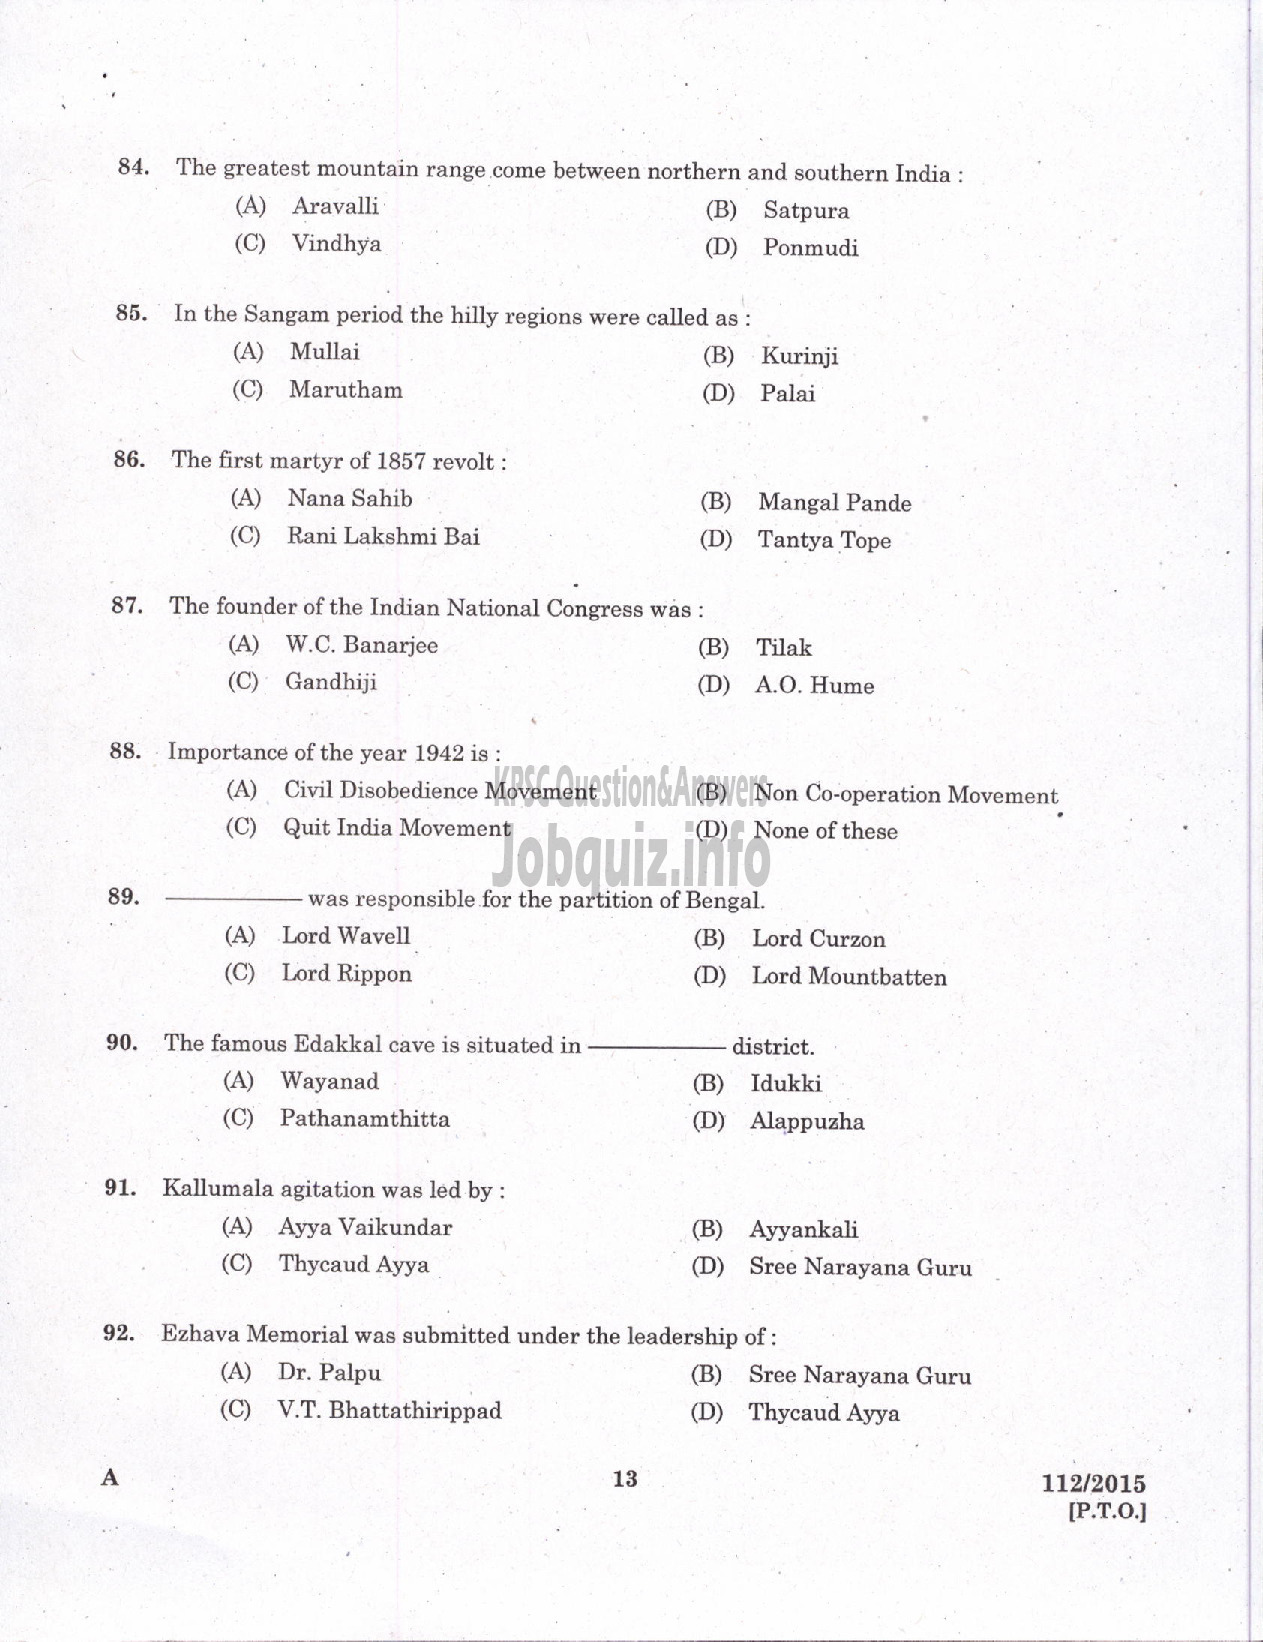 Kerala PSC Question Paper - TRADESMAN ELECTRICAL TECHNICAL EDUCATION/ELECTRICIAN GROUND WATER /ELECTRICIAN GR II PRINTING GOVT PRESSES ELECTRICIAN AGRICULTURE /ELECTRICIAN GR II THE KERALA CERAMICS LTD-11